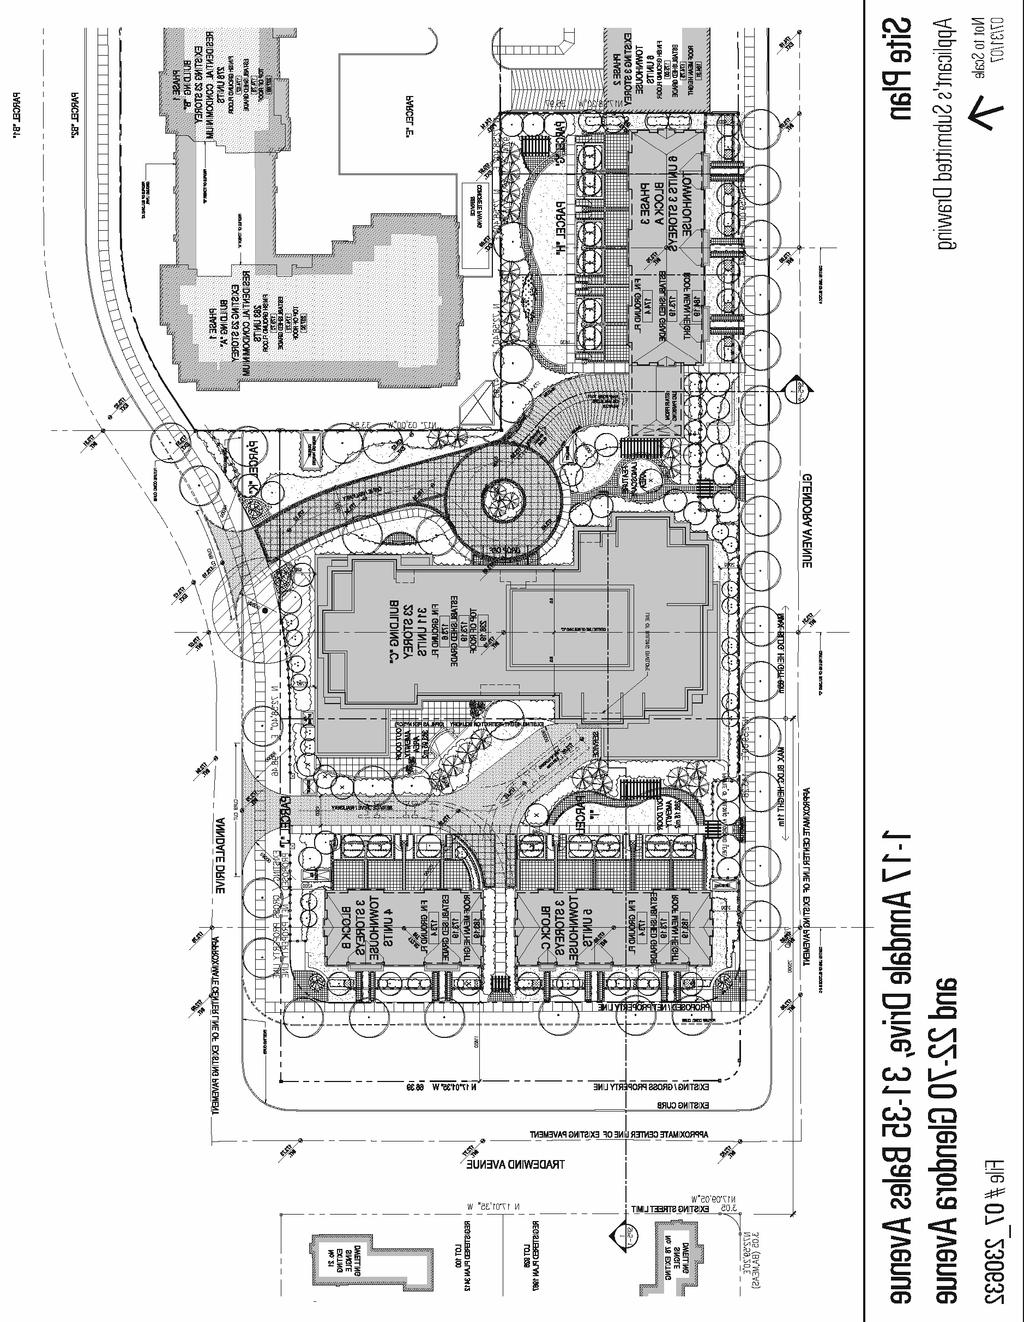 Attachment 1b: Site Plan for Current Proposal Staff report for